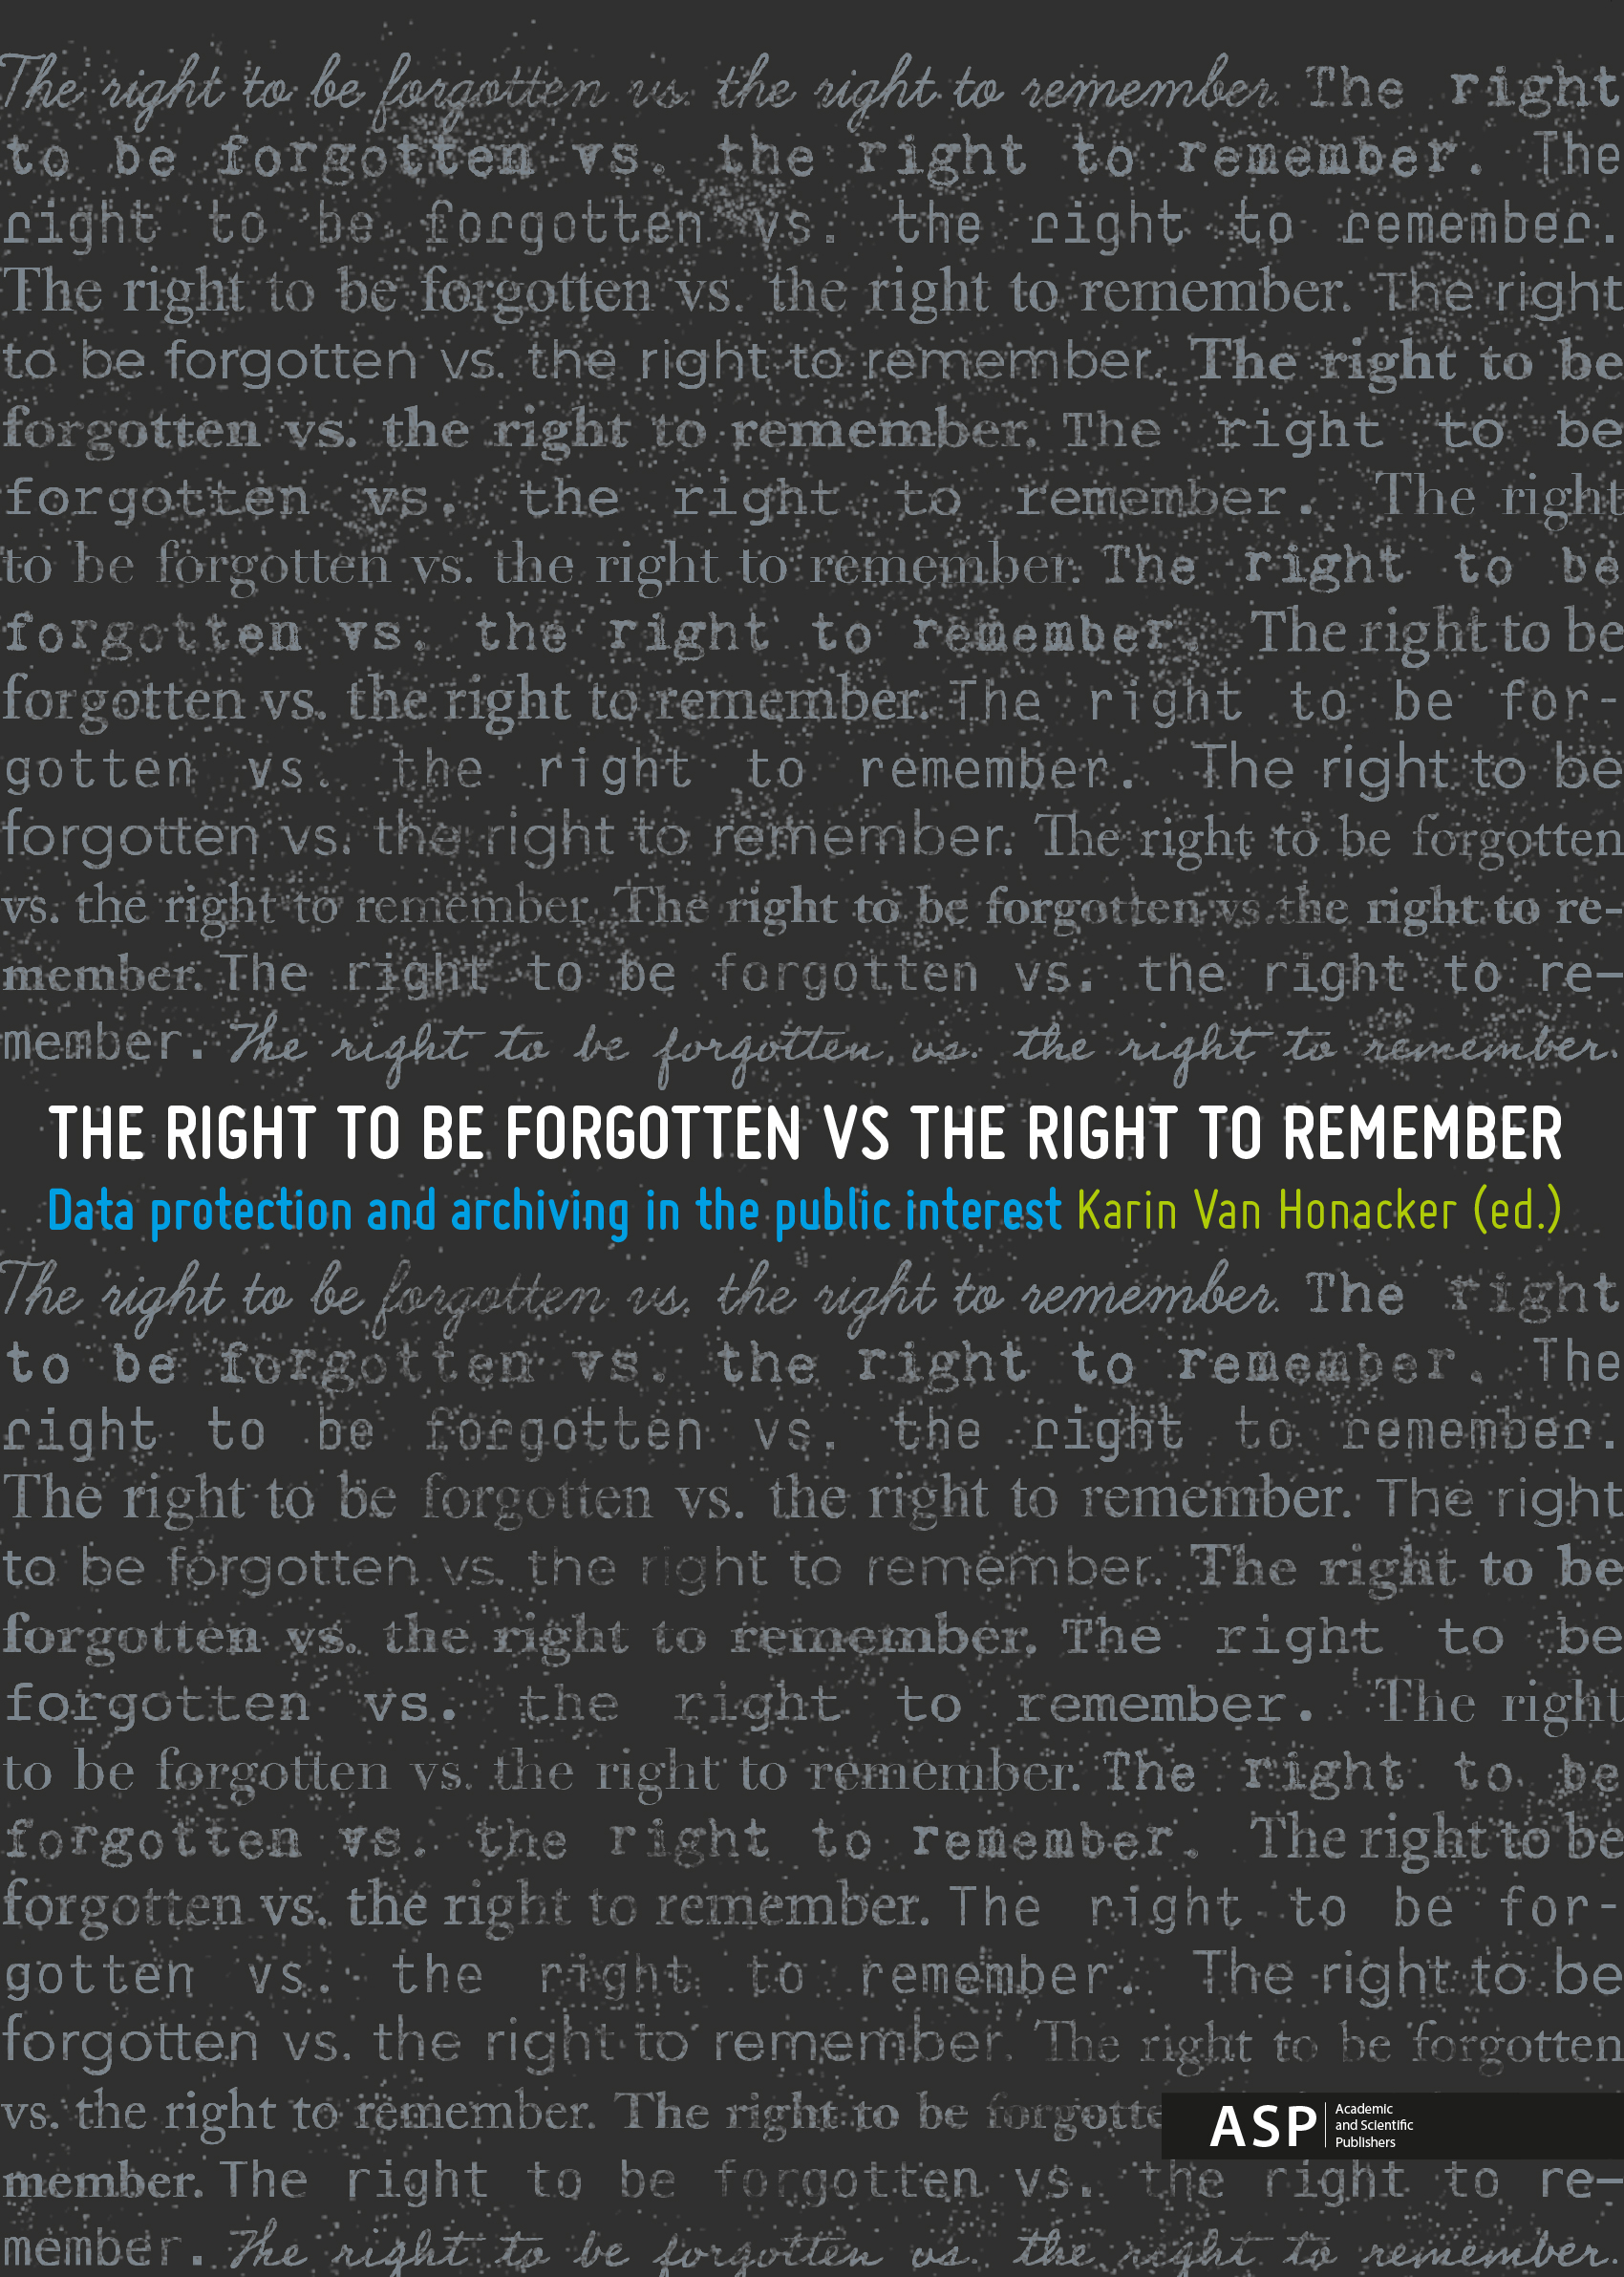 THE RIGHT TO BE FORGOTTEN VS THE RIGHT TO REMEMBER